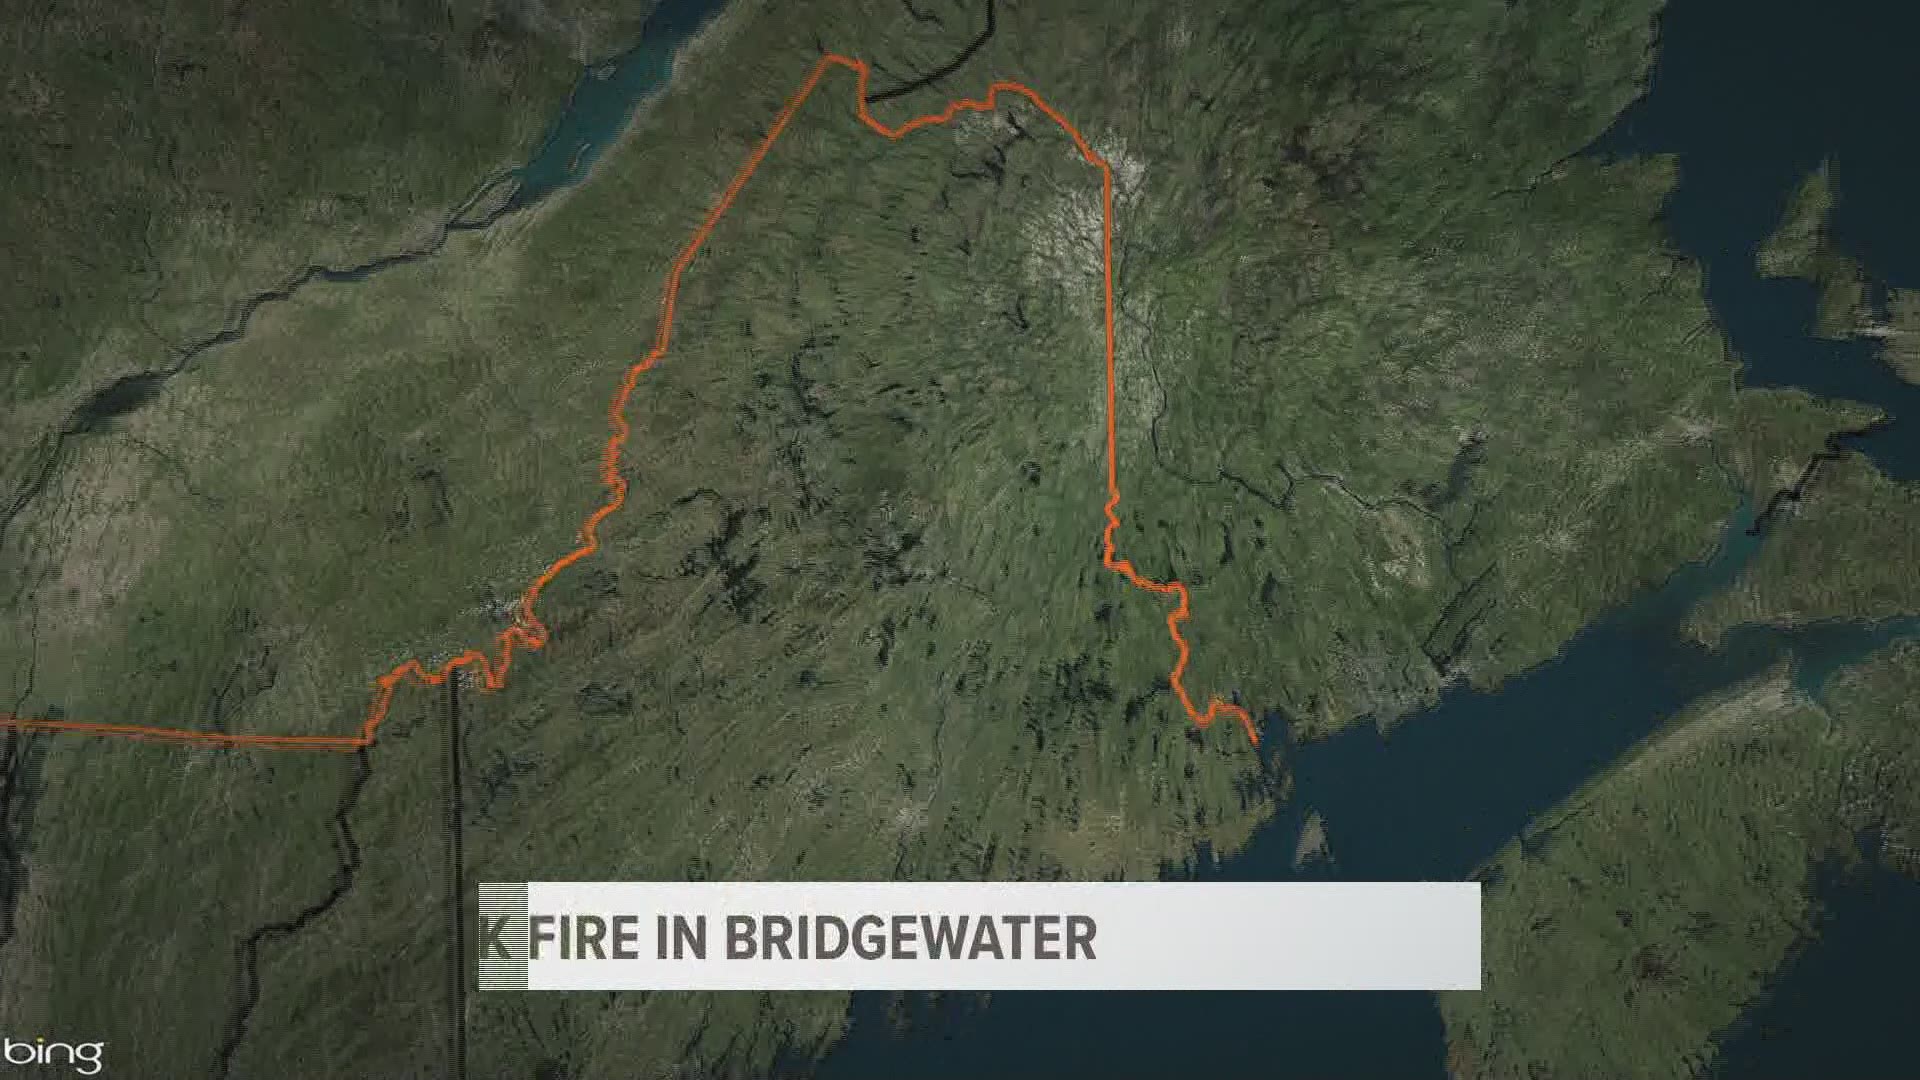 When troopers arrived to the scene on Route One in Bridgewater, the truck was fully engulfed.